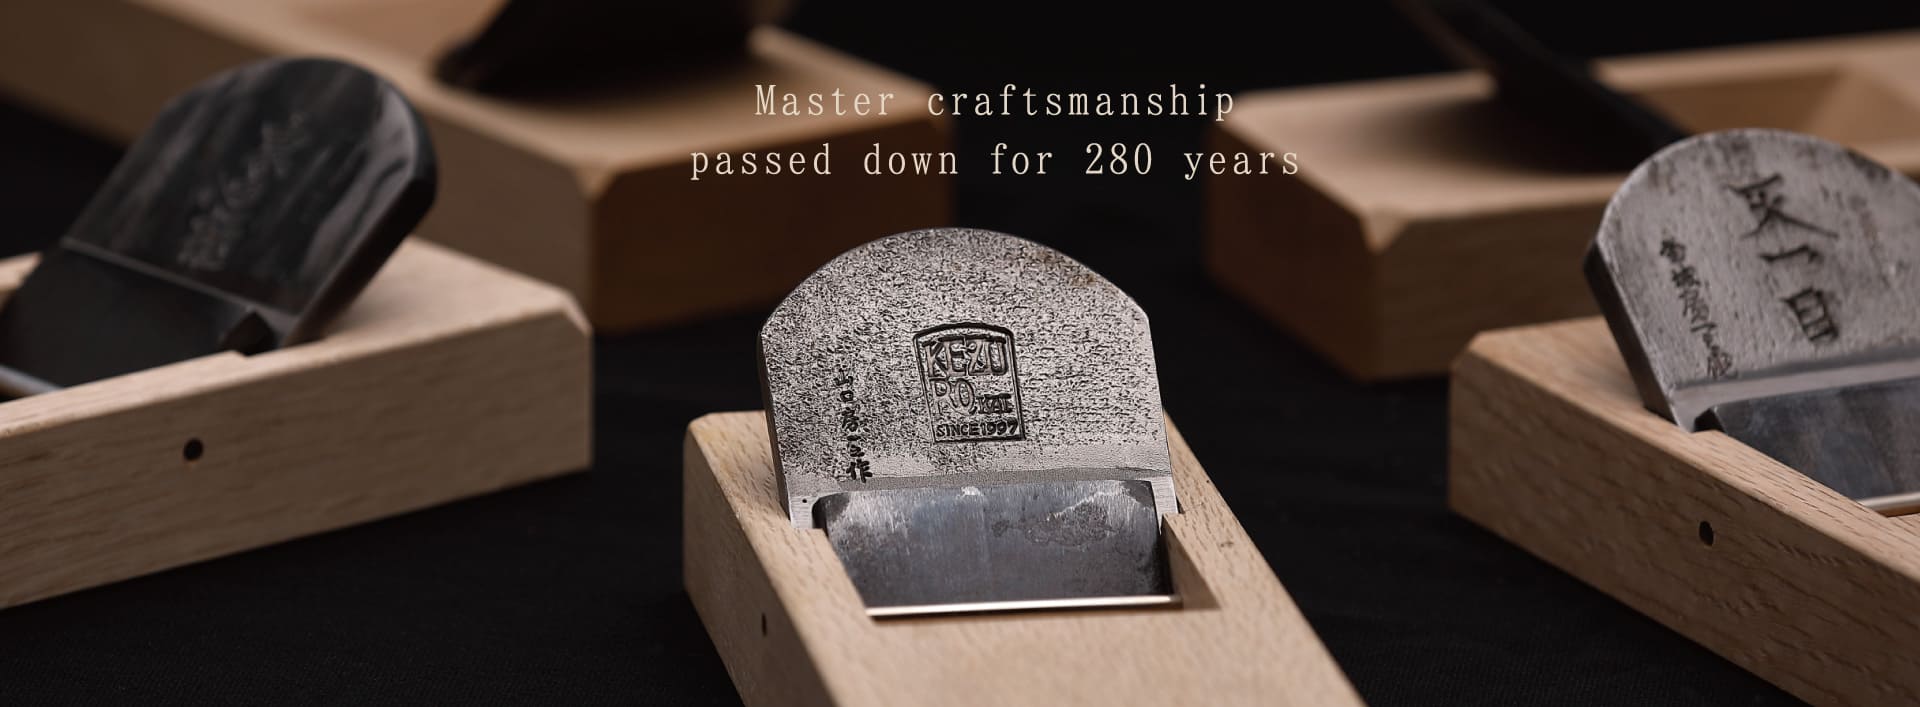 Master craftsmanship passed down for 280 years